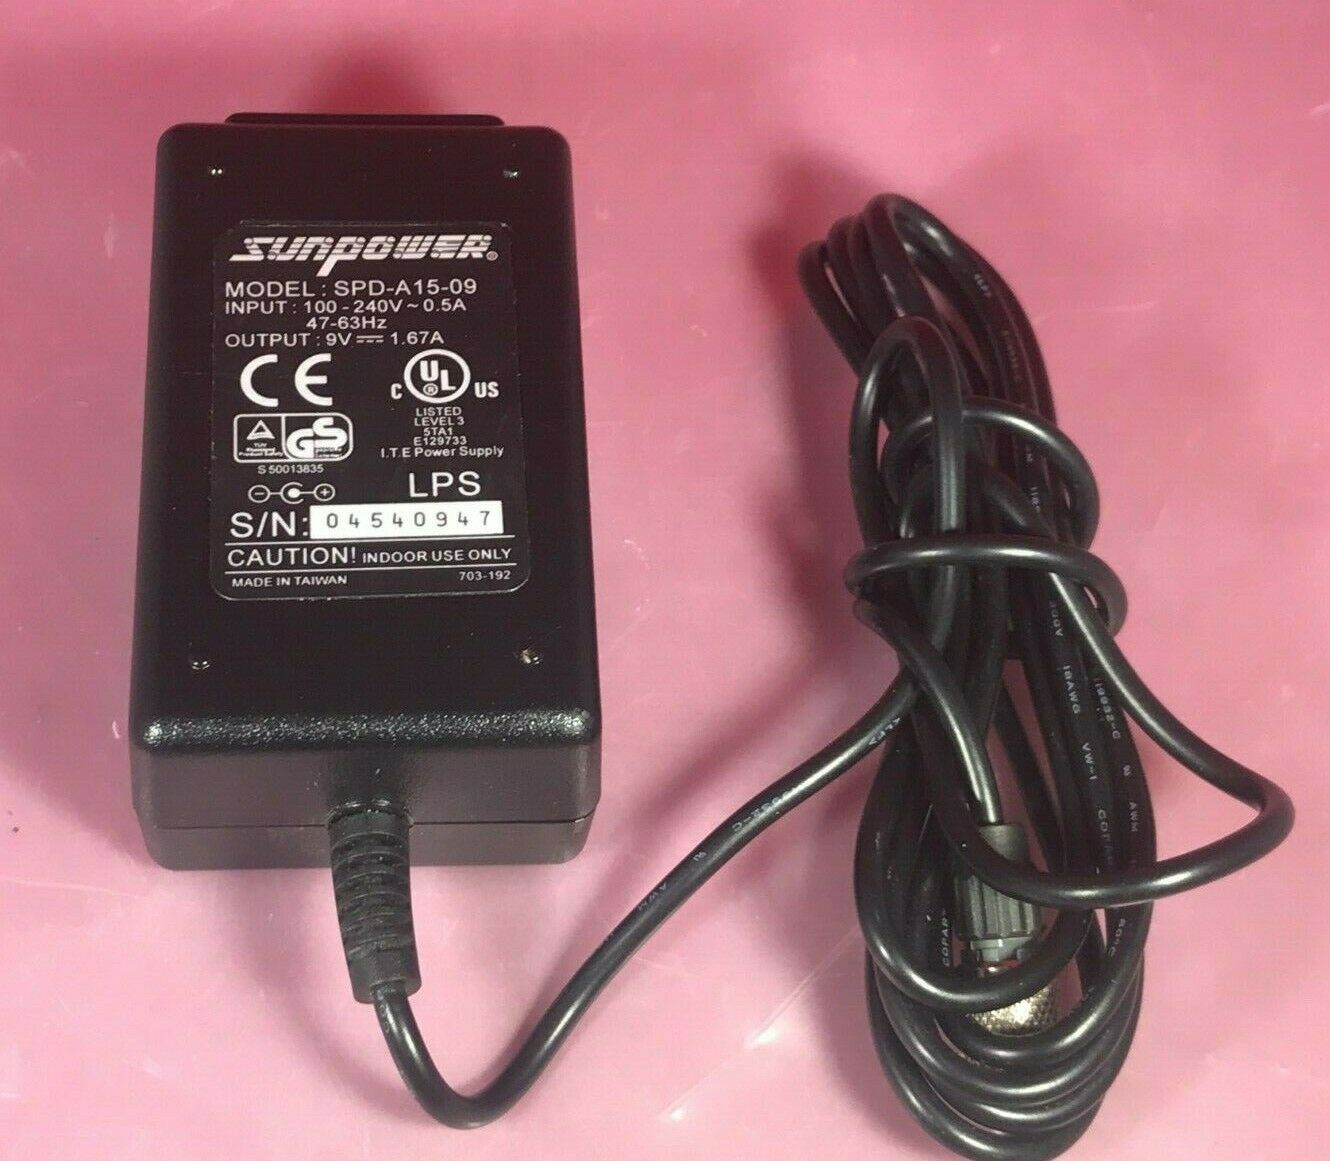 Sunpower SPD-A15-09 9V 1.67A AC Adapter Charger genuine brand new Compatible Brand: For Sun Compatible Product Line: